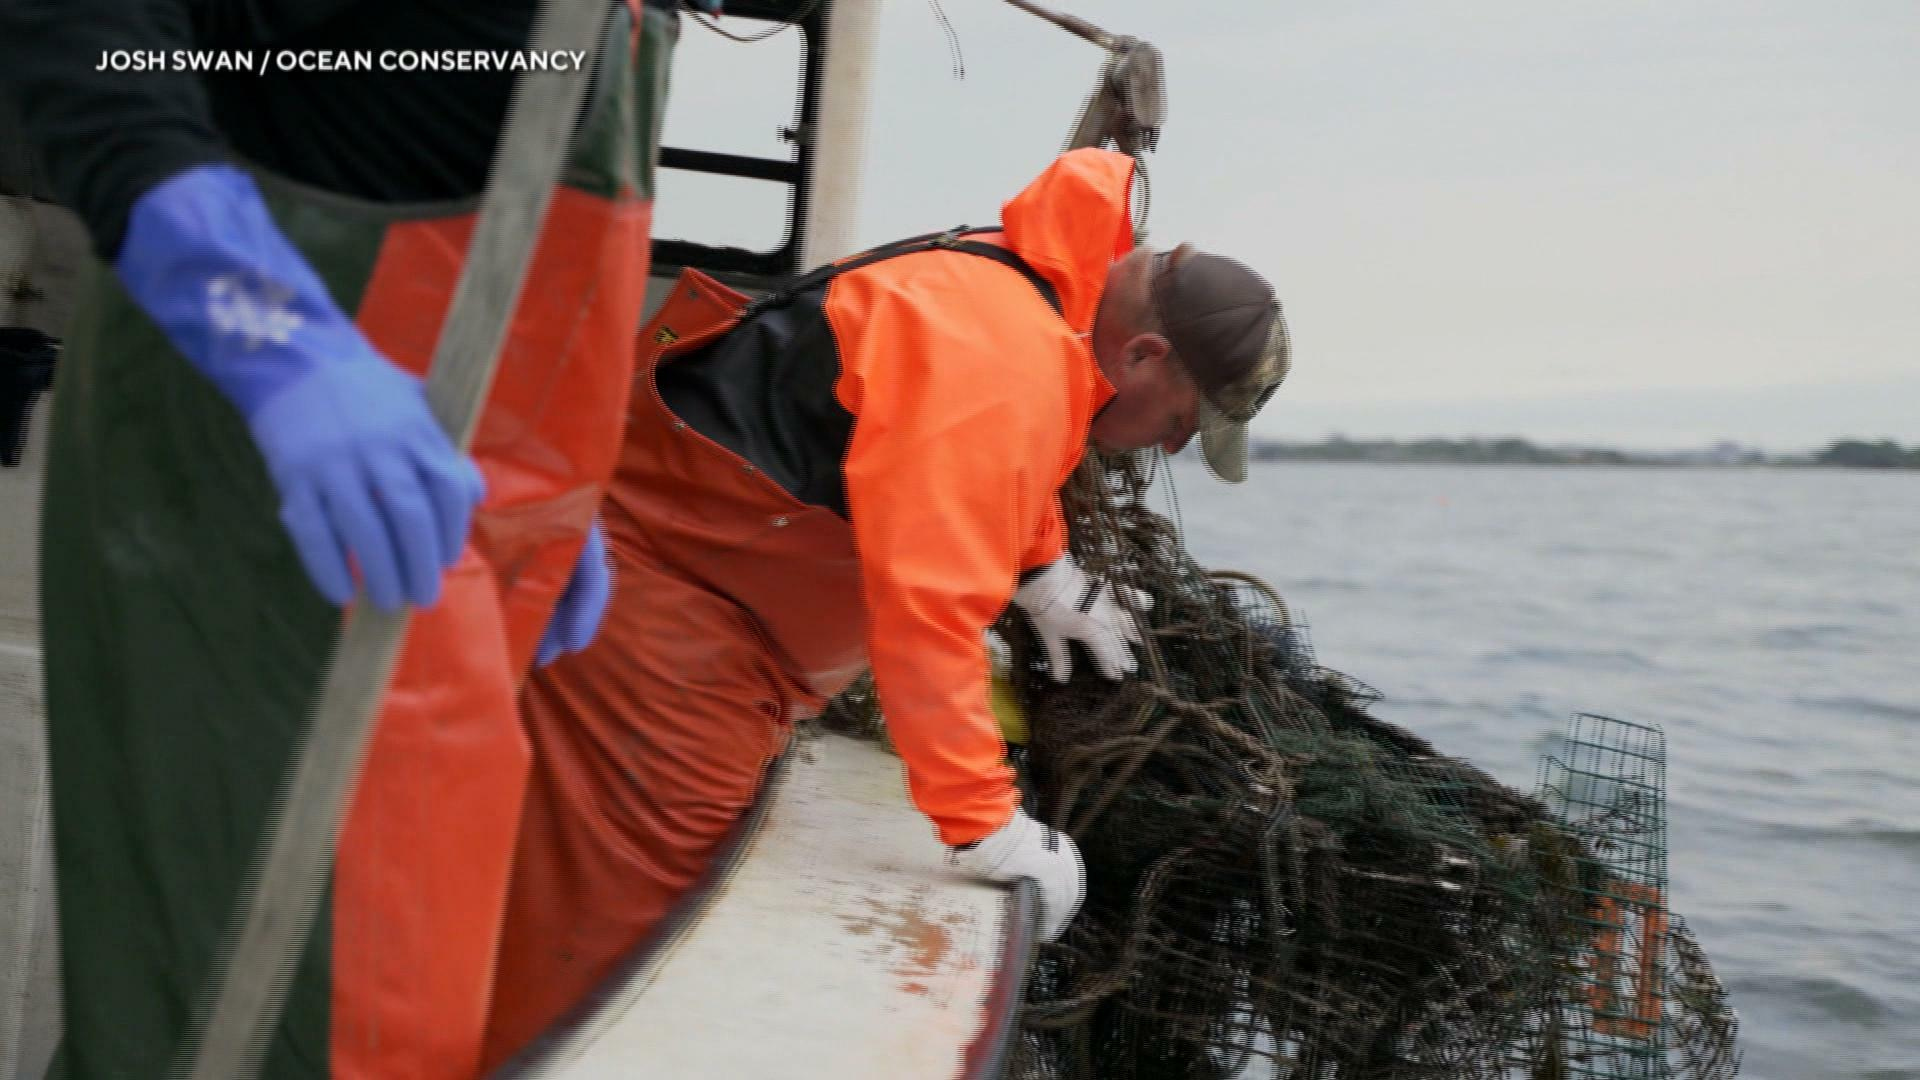 Watch CBS Mornings: Cleaning up ghost gear from world's oceans - Full  show on CBS